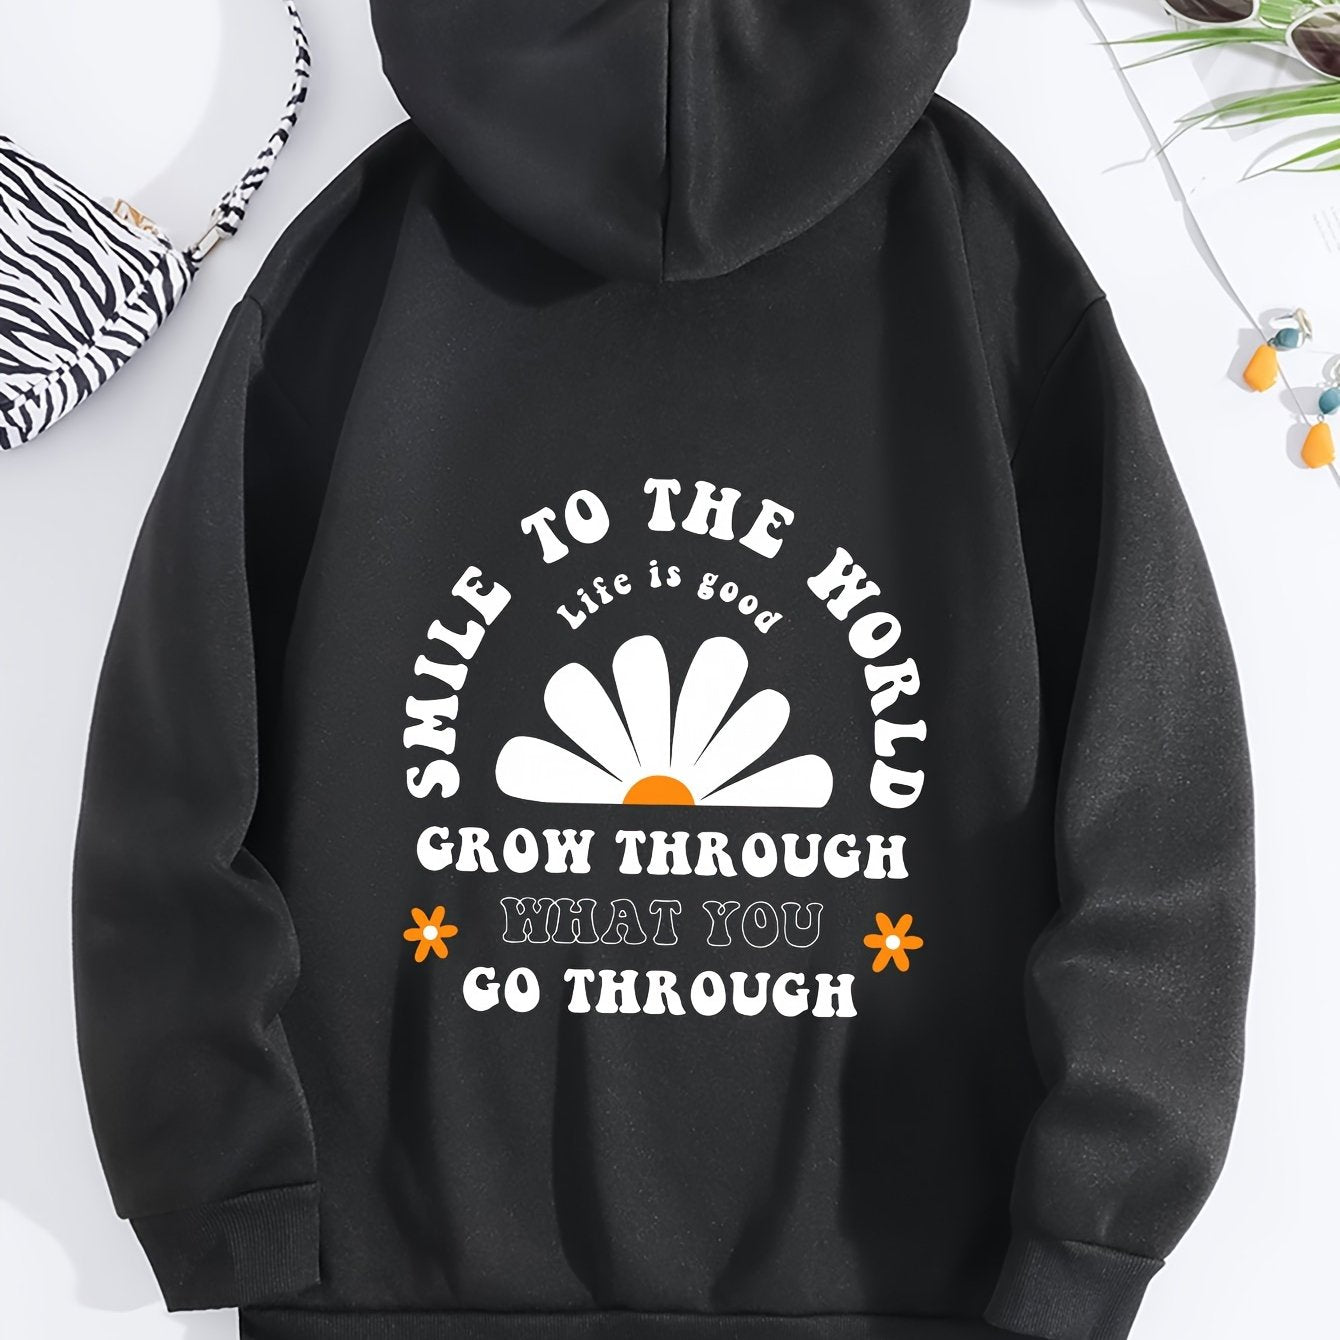 Smile To The World: Grow Through What you Go Through Women's Christian Pullover Hooded Sweatshirt claimedbygoddesigns